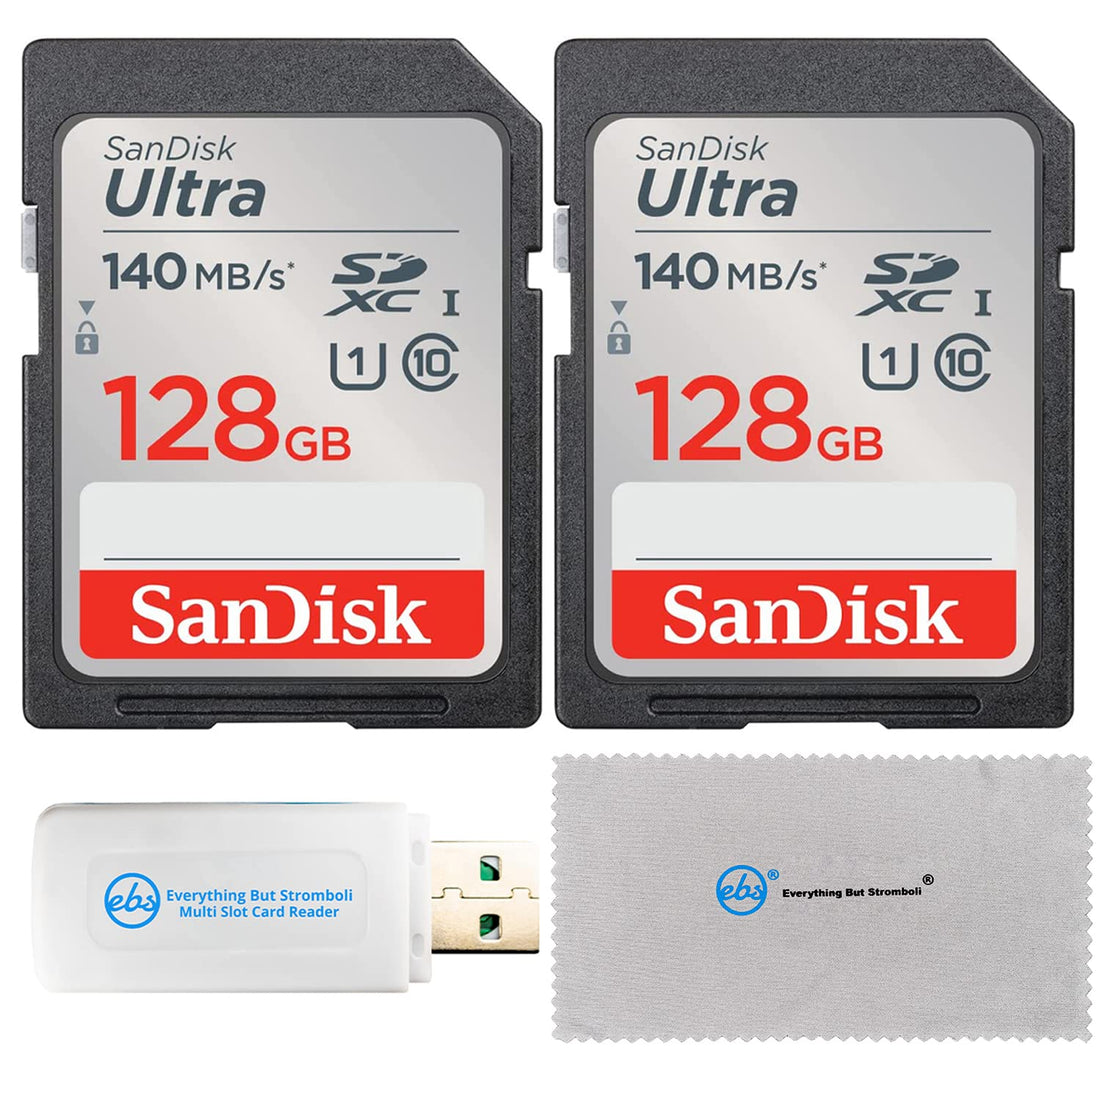 SanDisk 128GB SD Ultra Memory Card (Two Pack) Works with Canon EOS Rebel T7, Rebel T6, 77D Camera (SDSDUNB-128G-GN6IN) Bundle with Everything But Stromboli Multi Slot Card Reader & Micro Fiber Cloth